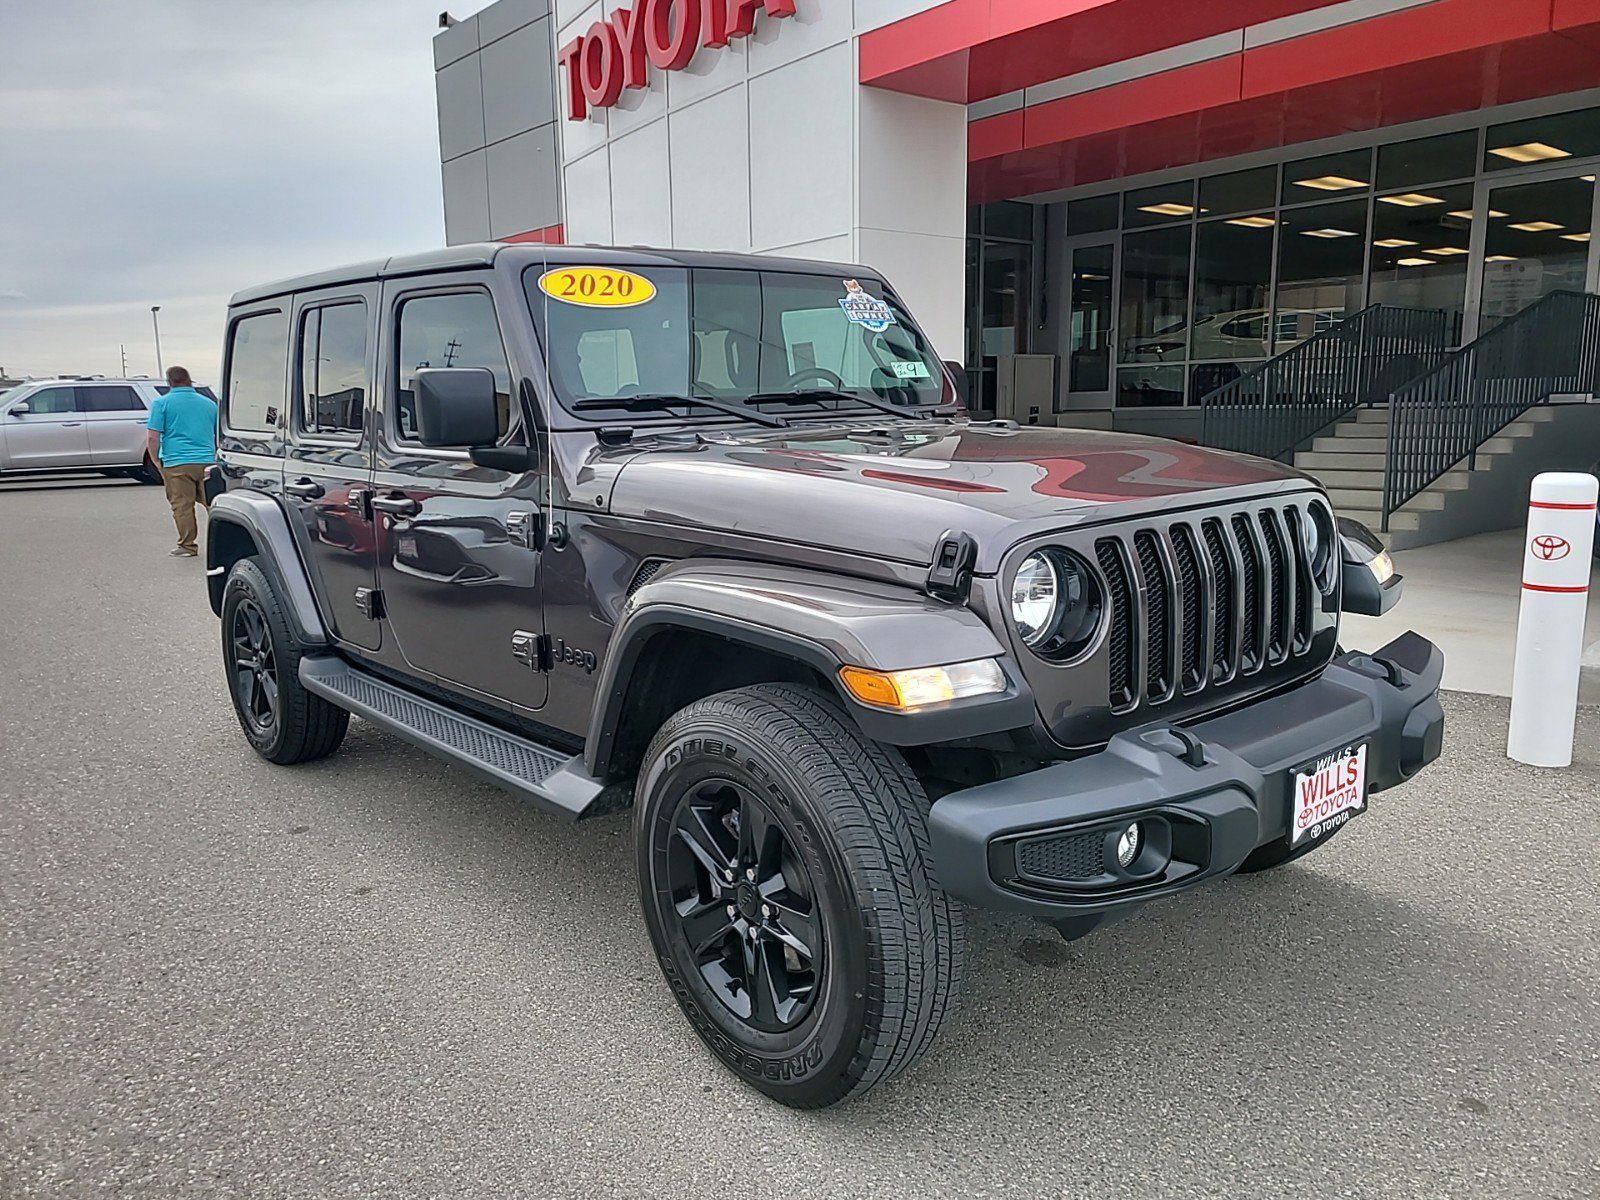 2020 - Jeep - Wrangler Unlimited - $42,599